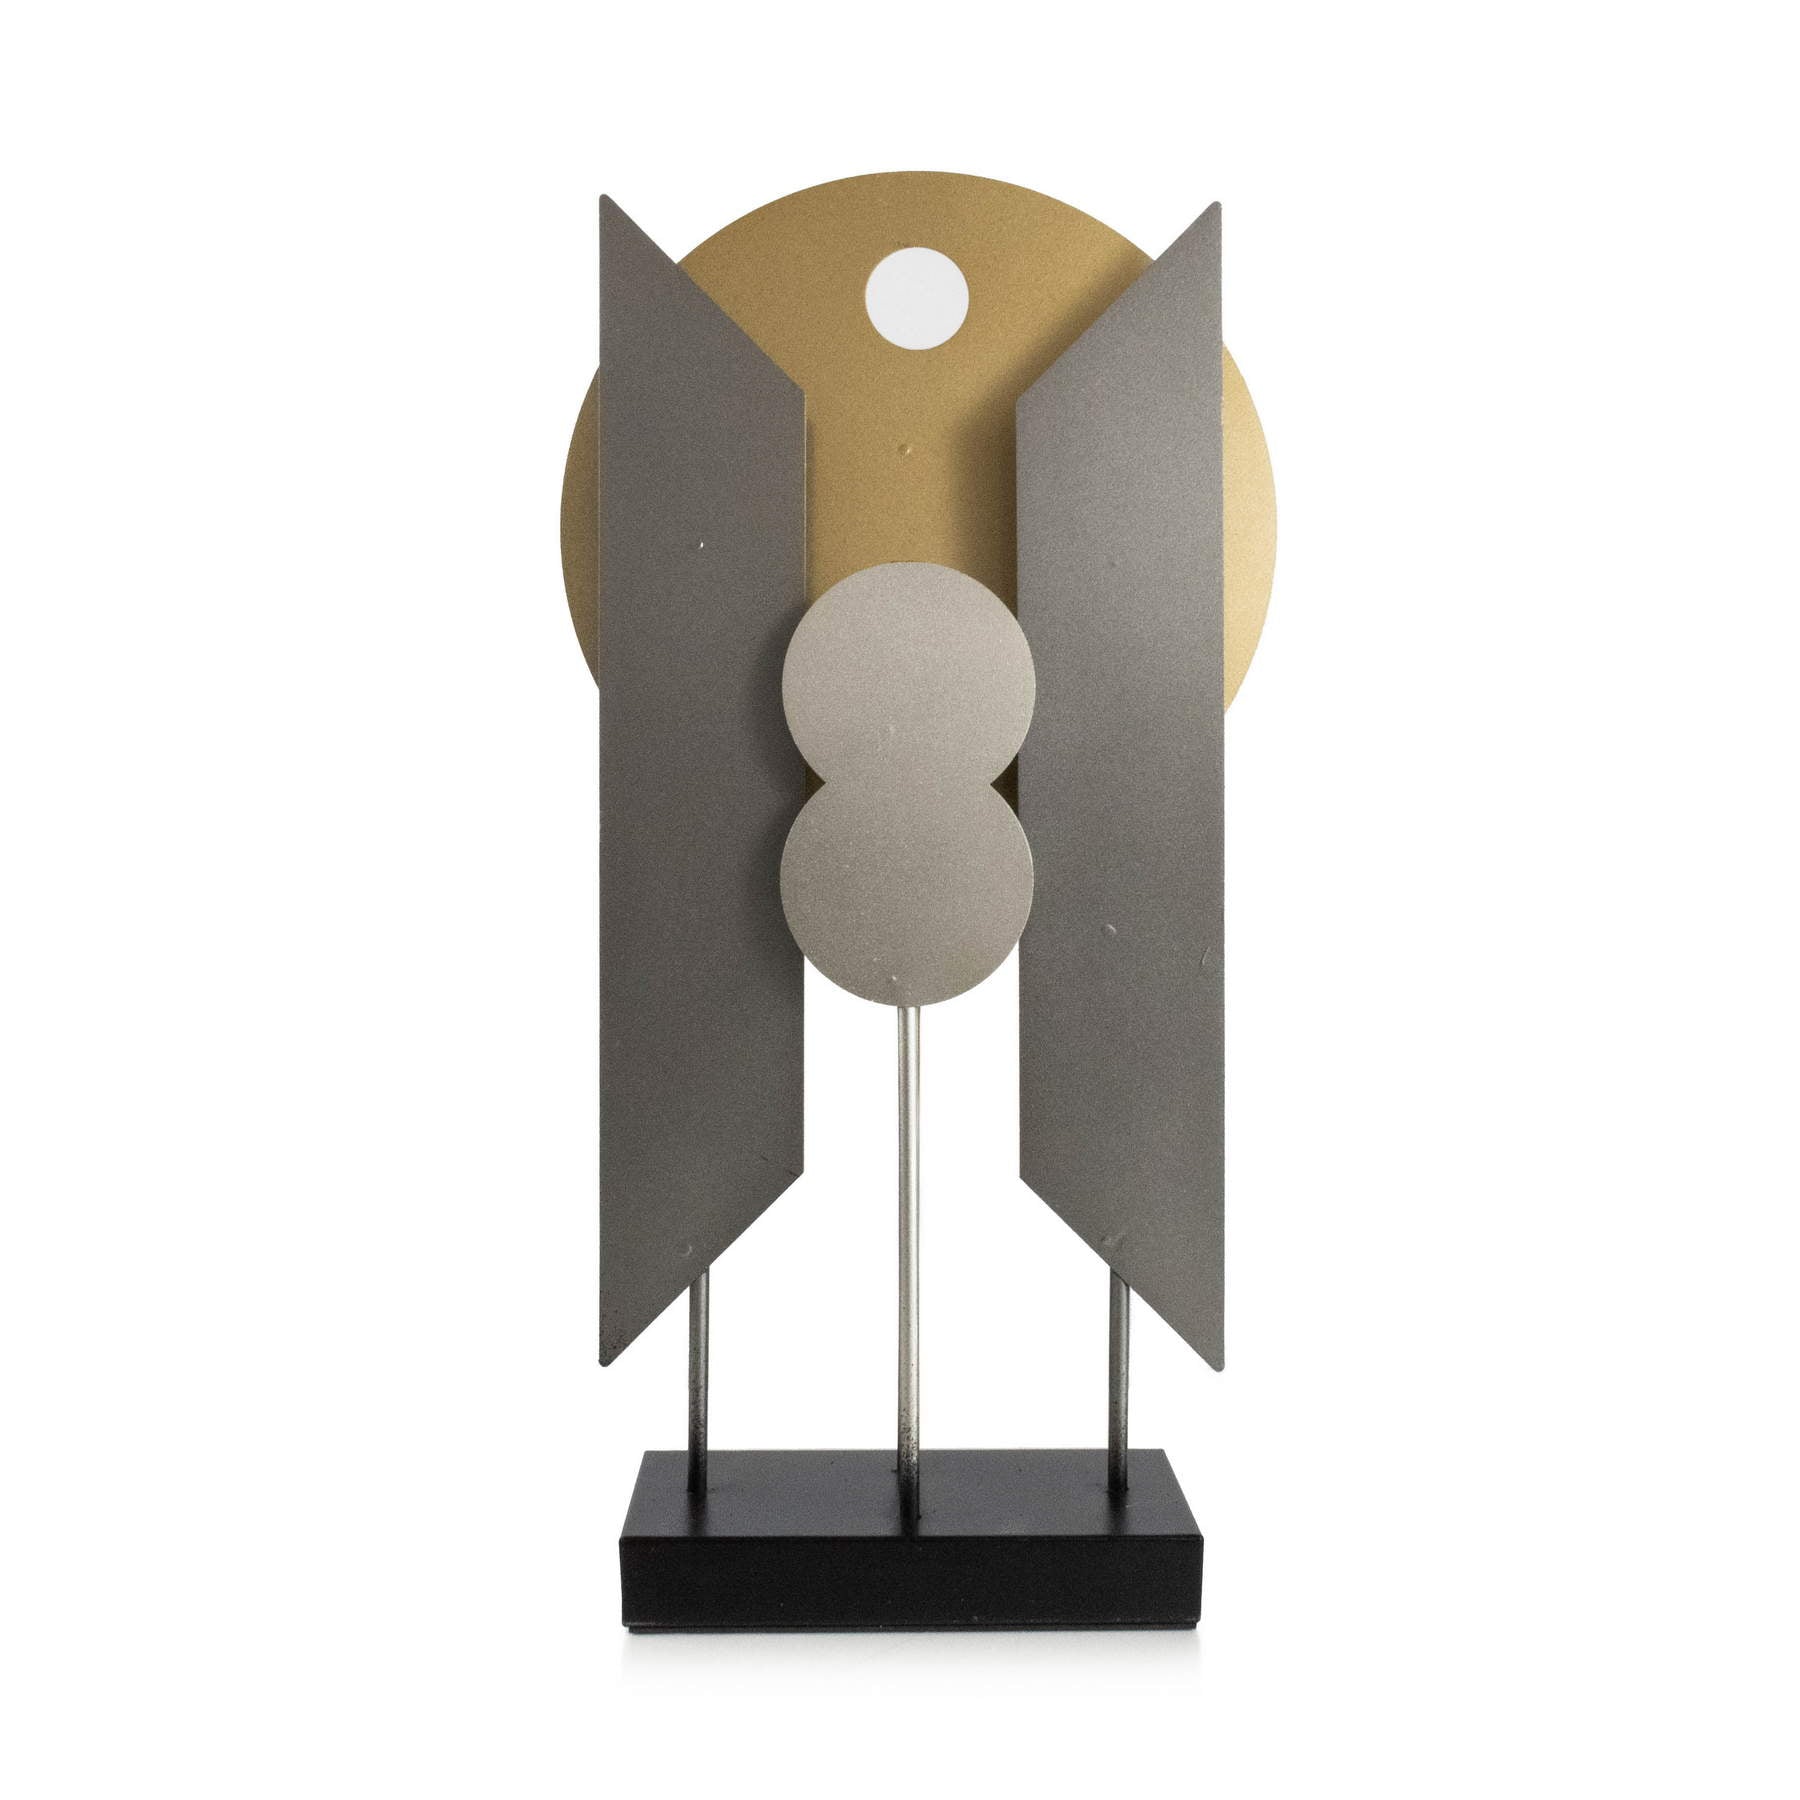 Abstract Gold & Gray Sculpture in Matte Finish Elevate Home Decor - Sculptures & Statues